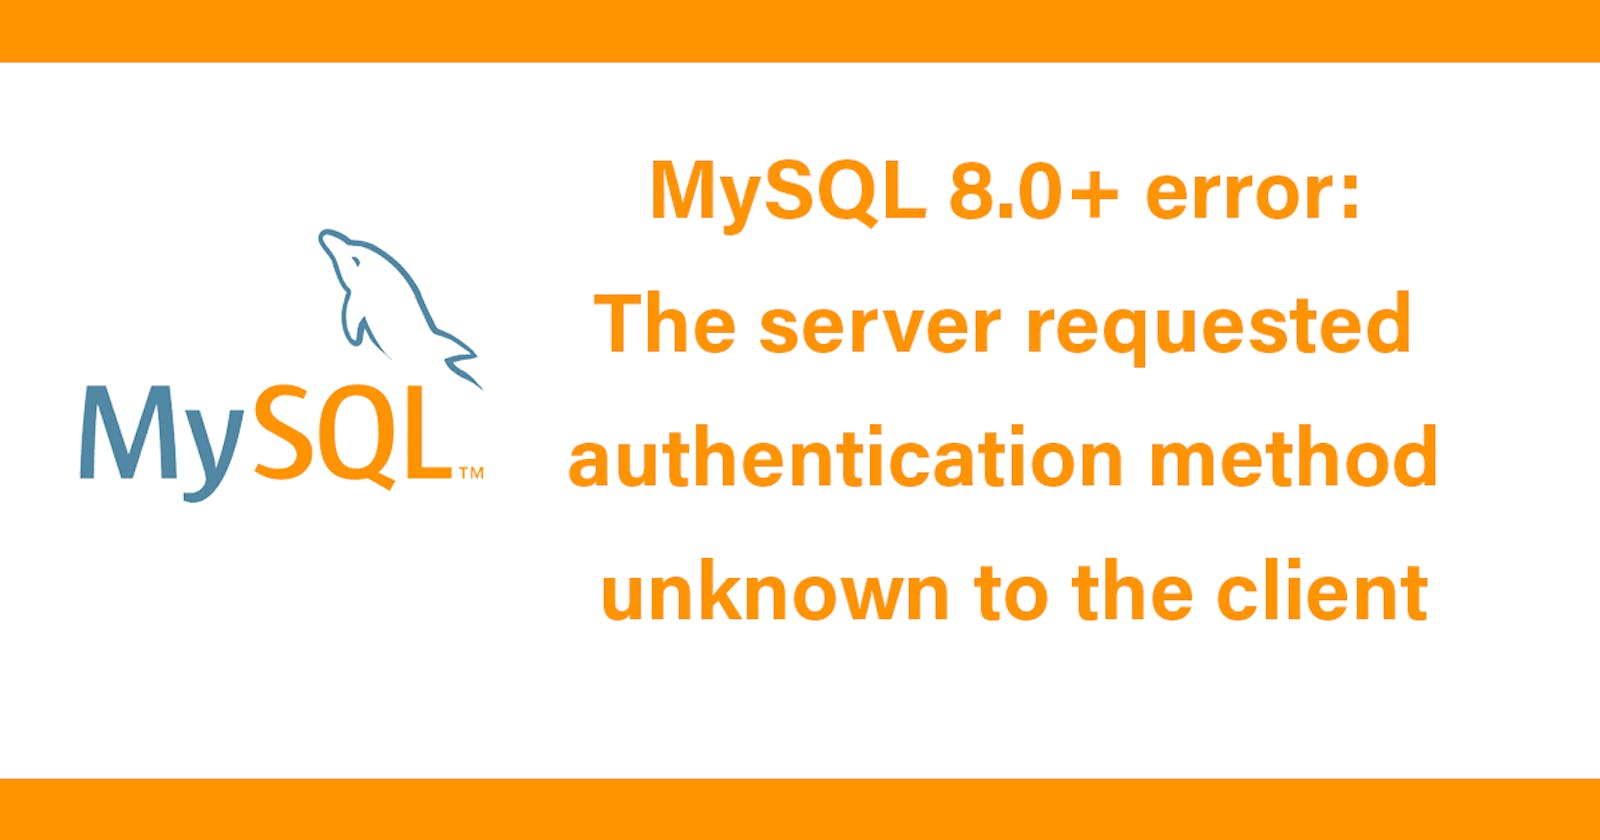 MySQL 8.0+ error: The server requested authentication method unknown to the client